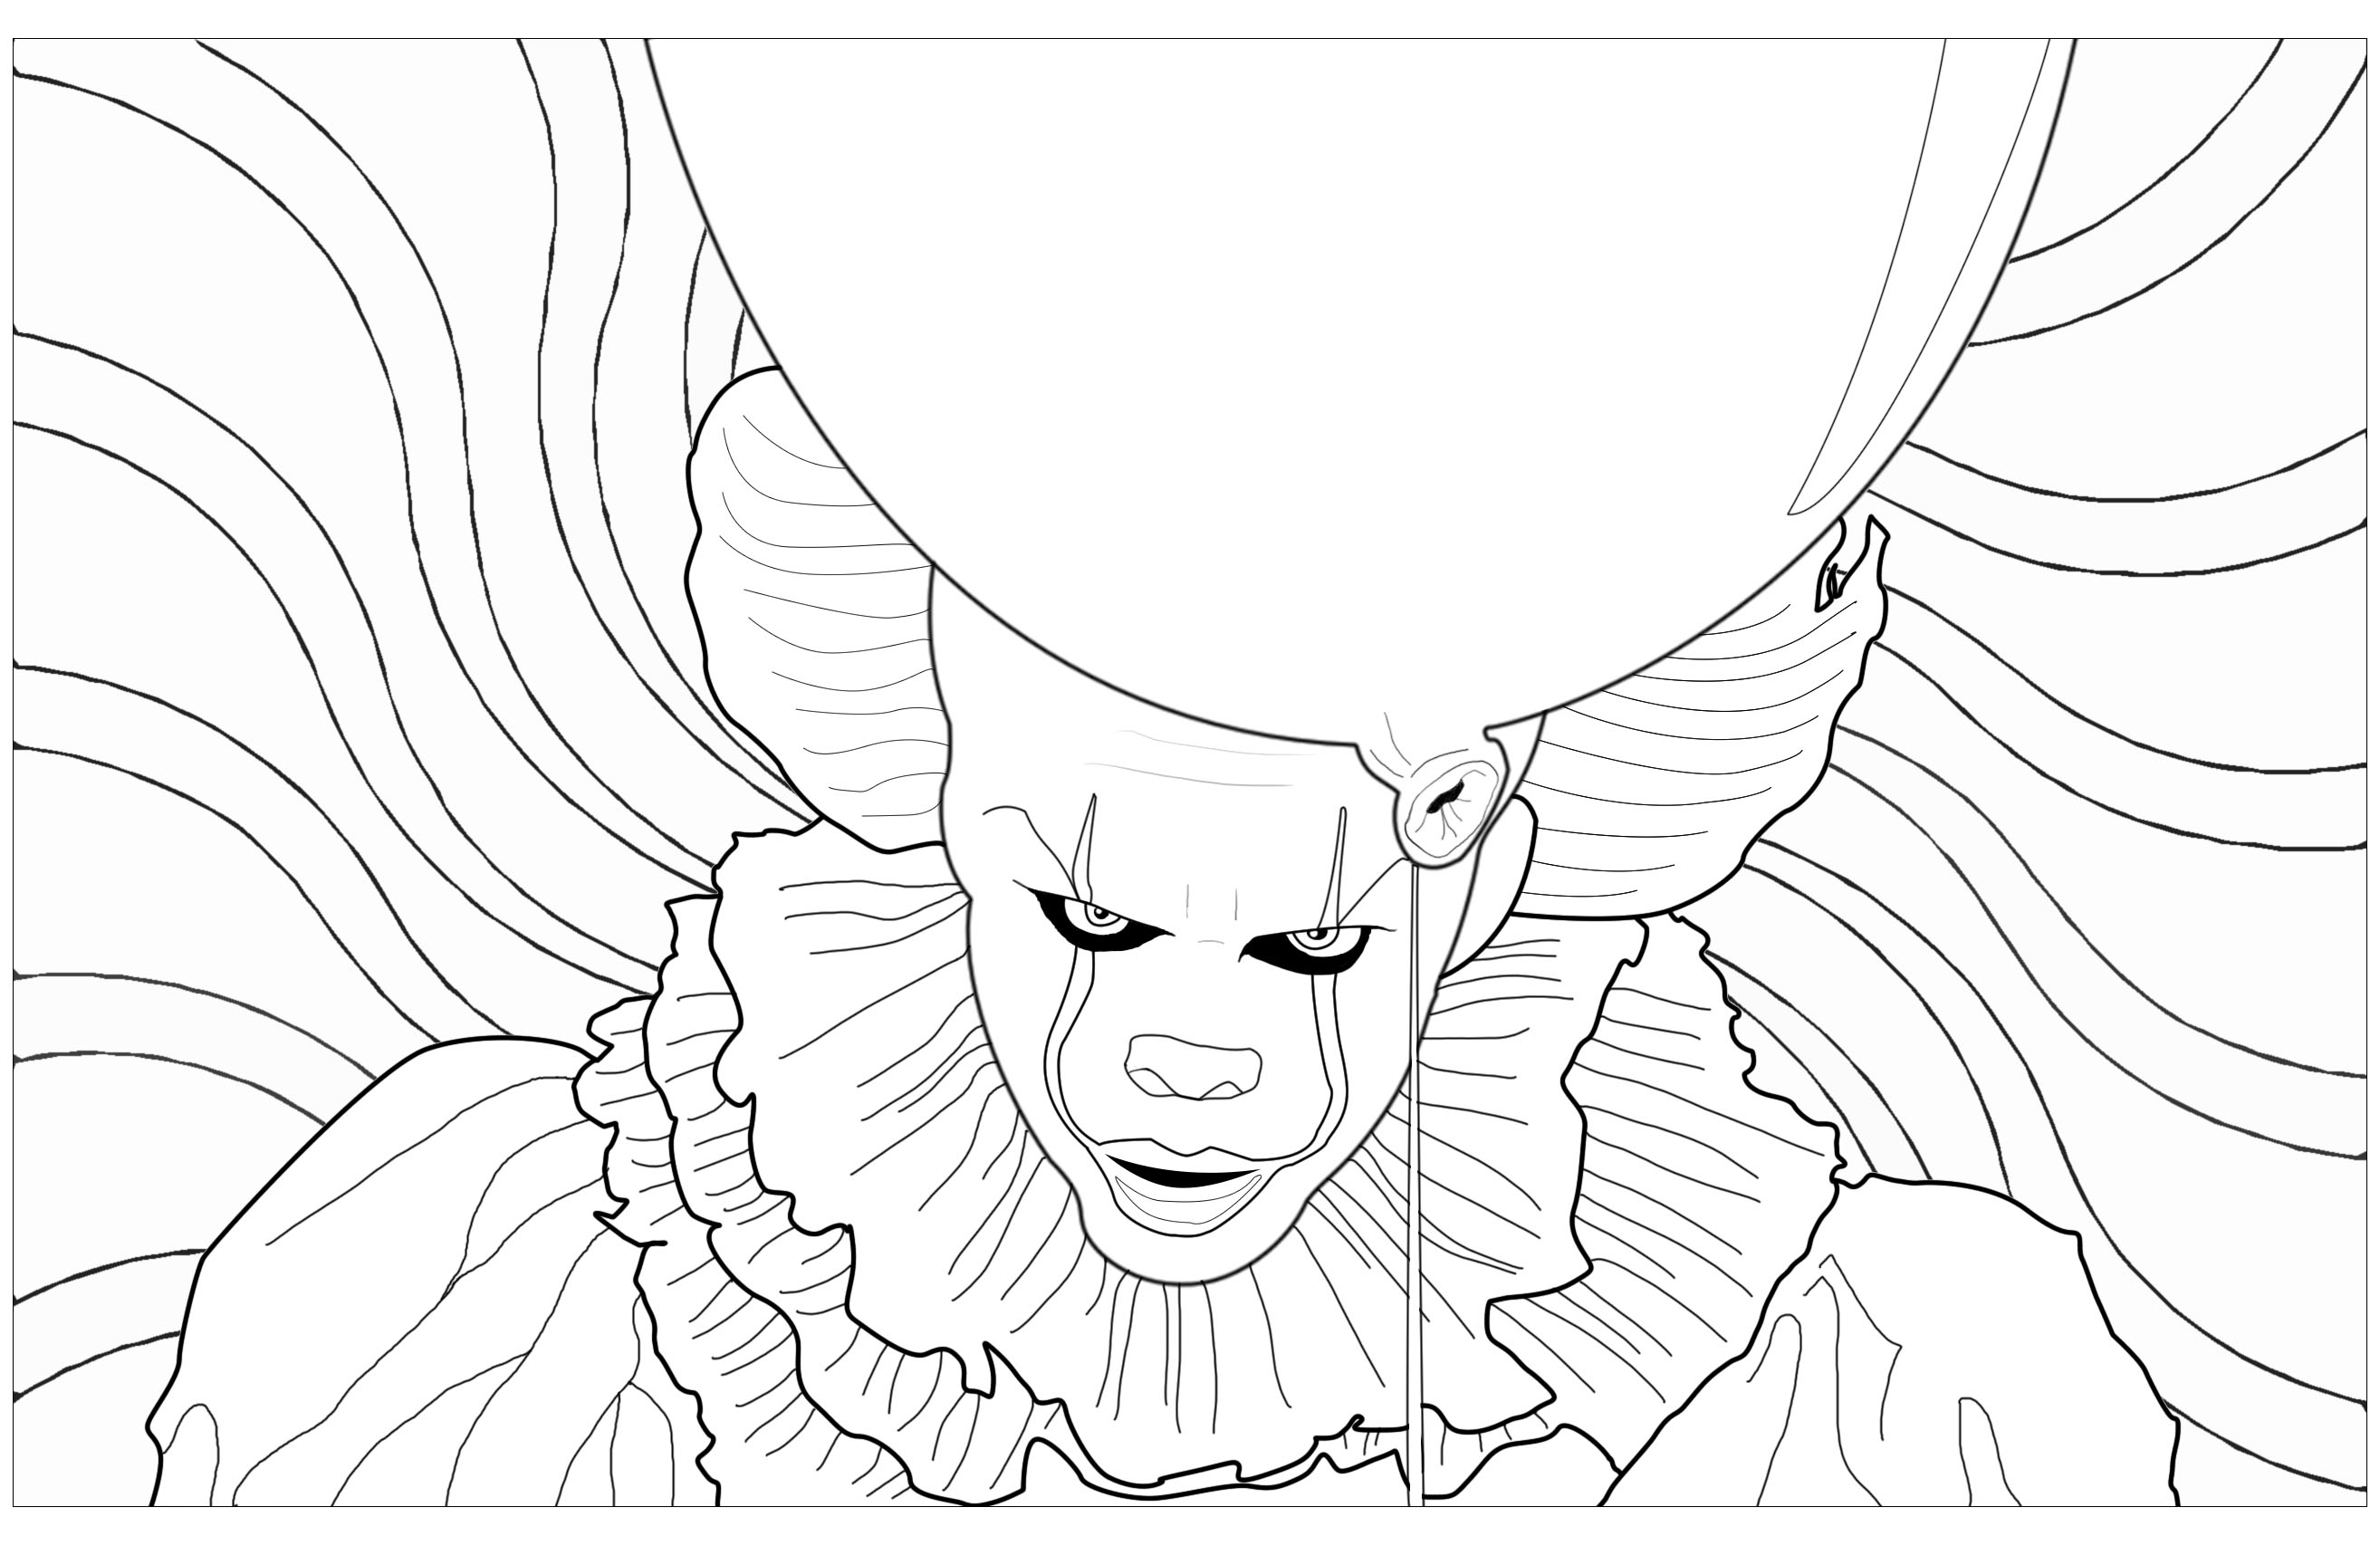 Ca clown pennywise psychedelic background - Halloween Adult Coloring Pages